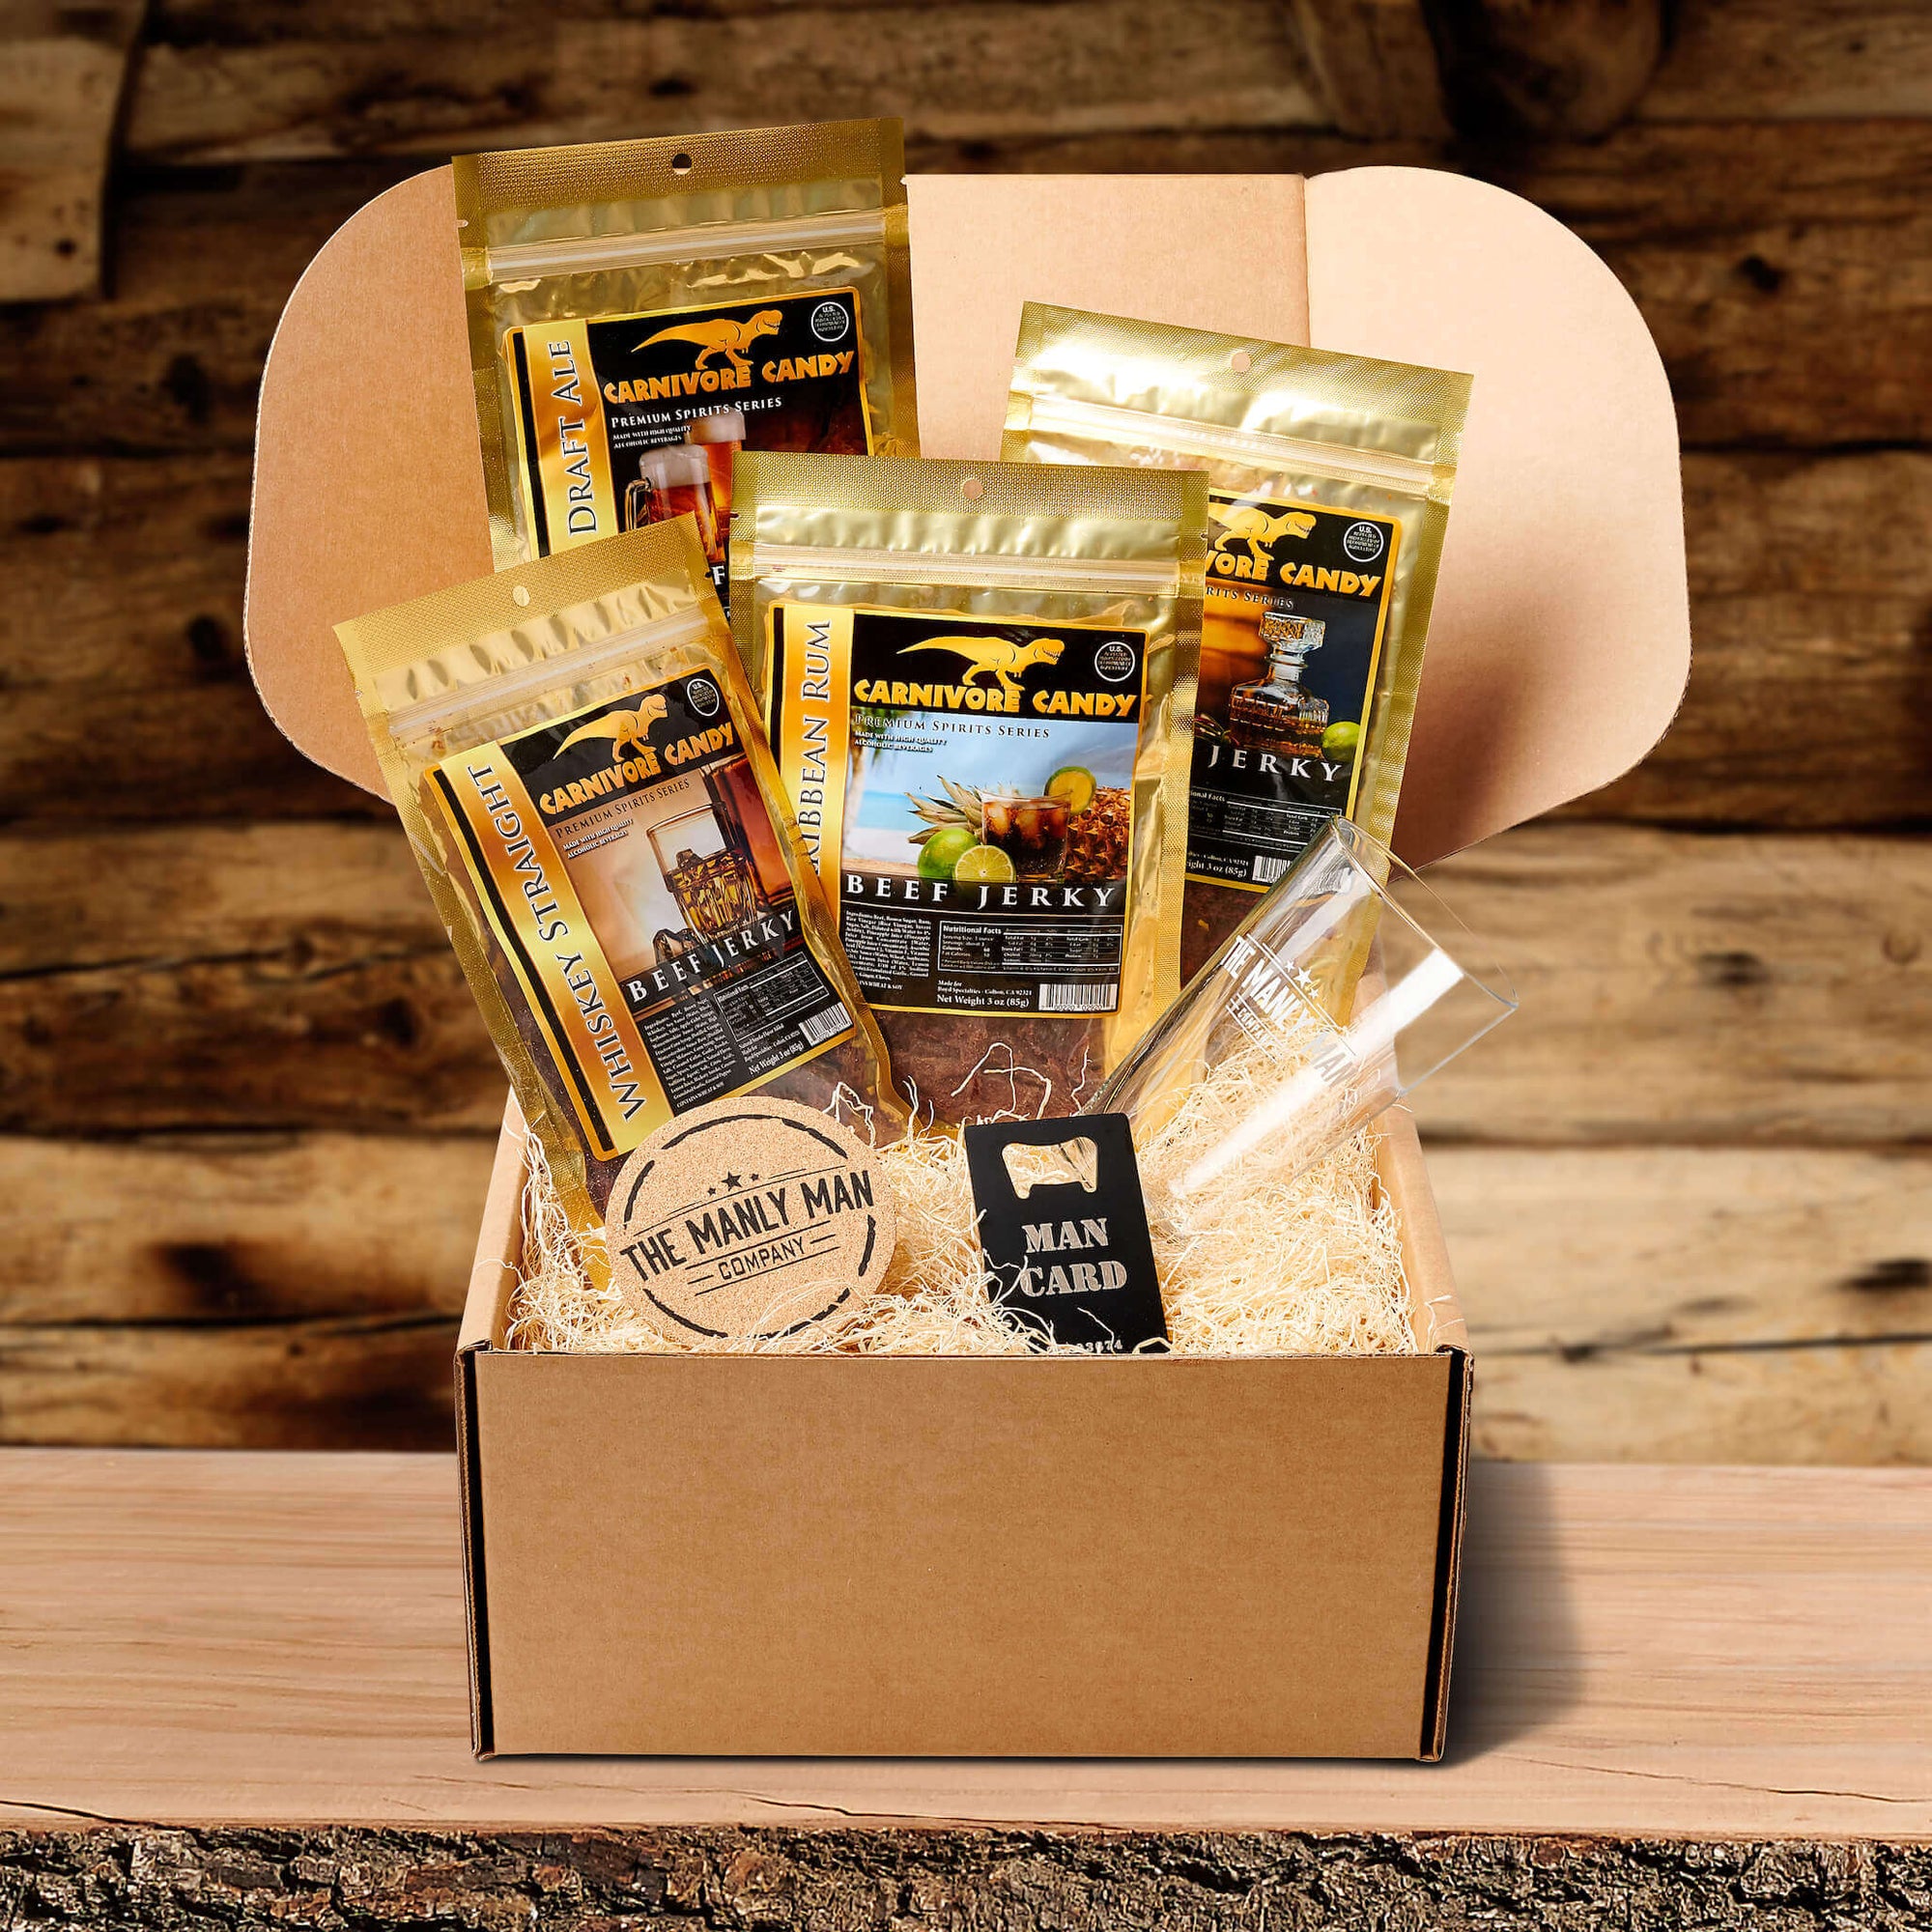 Gift crate for men, filled with alcohol-infused jerky, coaster, pint glass and man card, on log table and in front of wood panel background